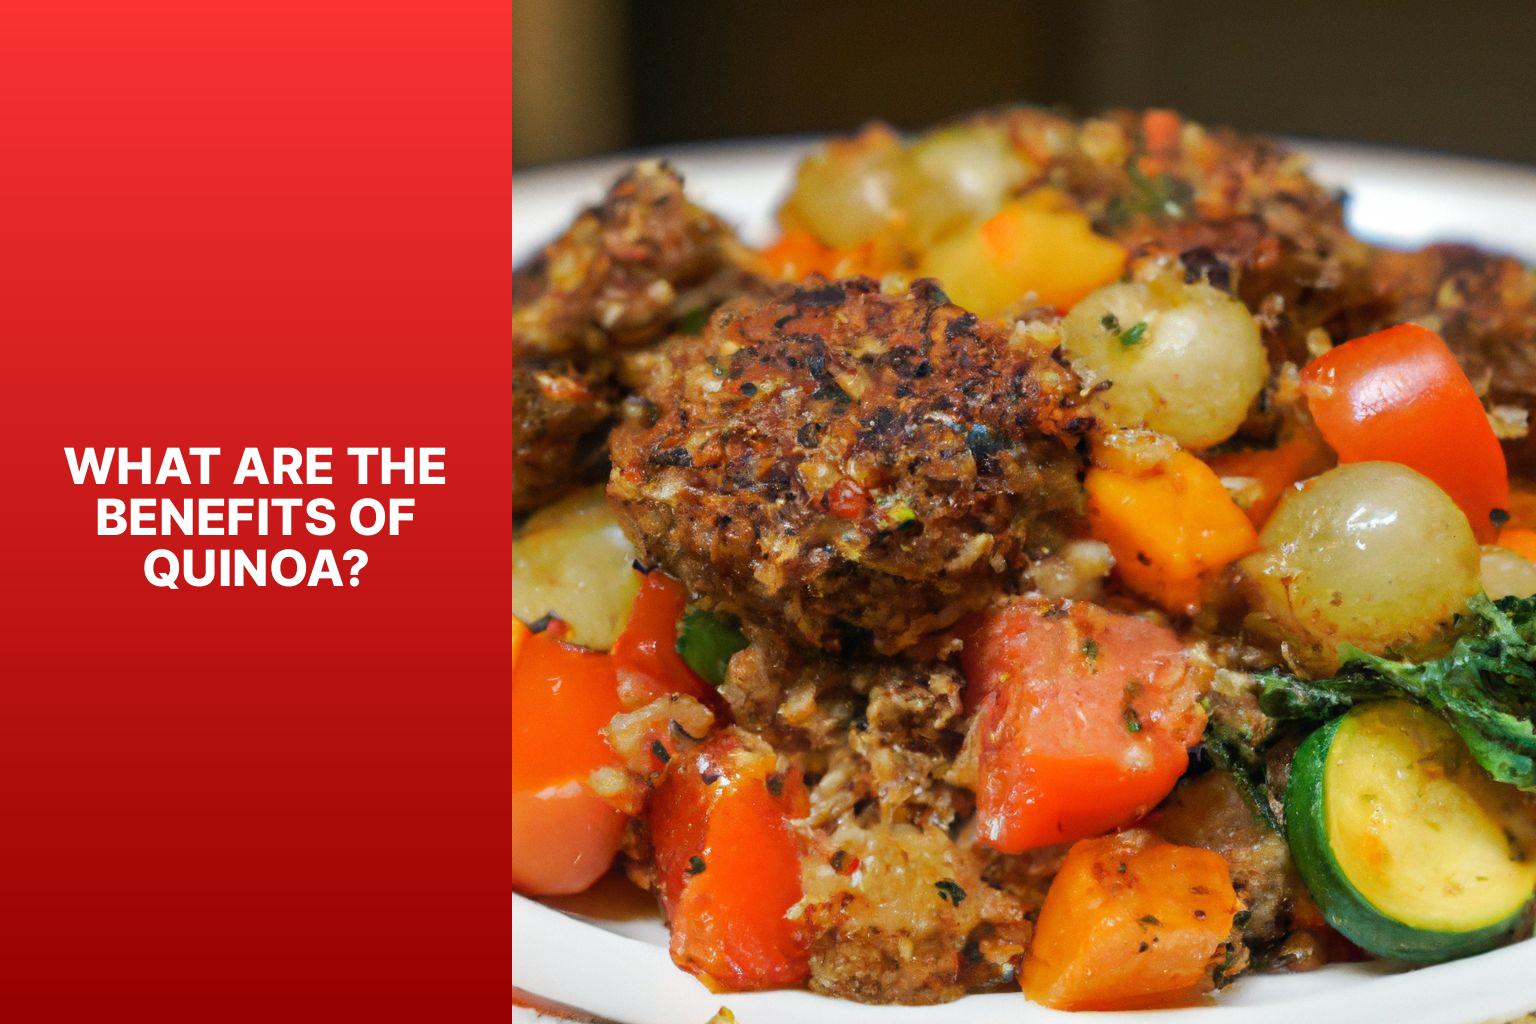 What Are the Benefits of Quinoa? - Quinoa with Vegetables and Homemade Meatballs 